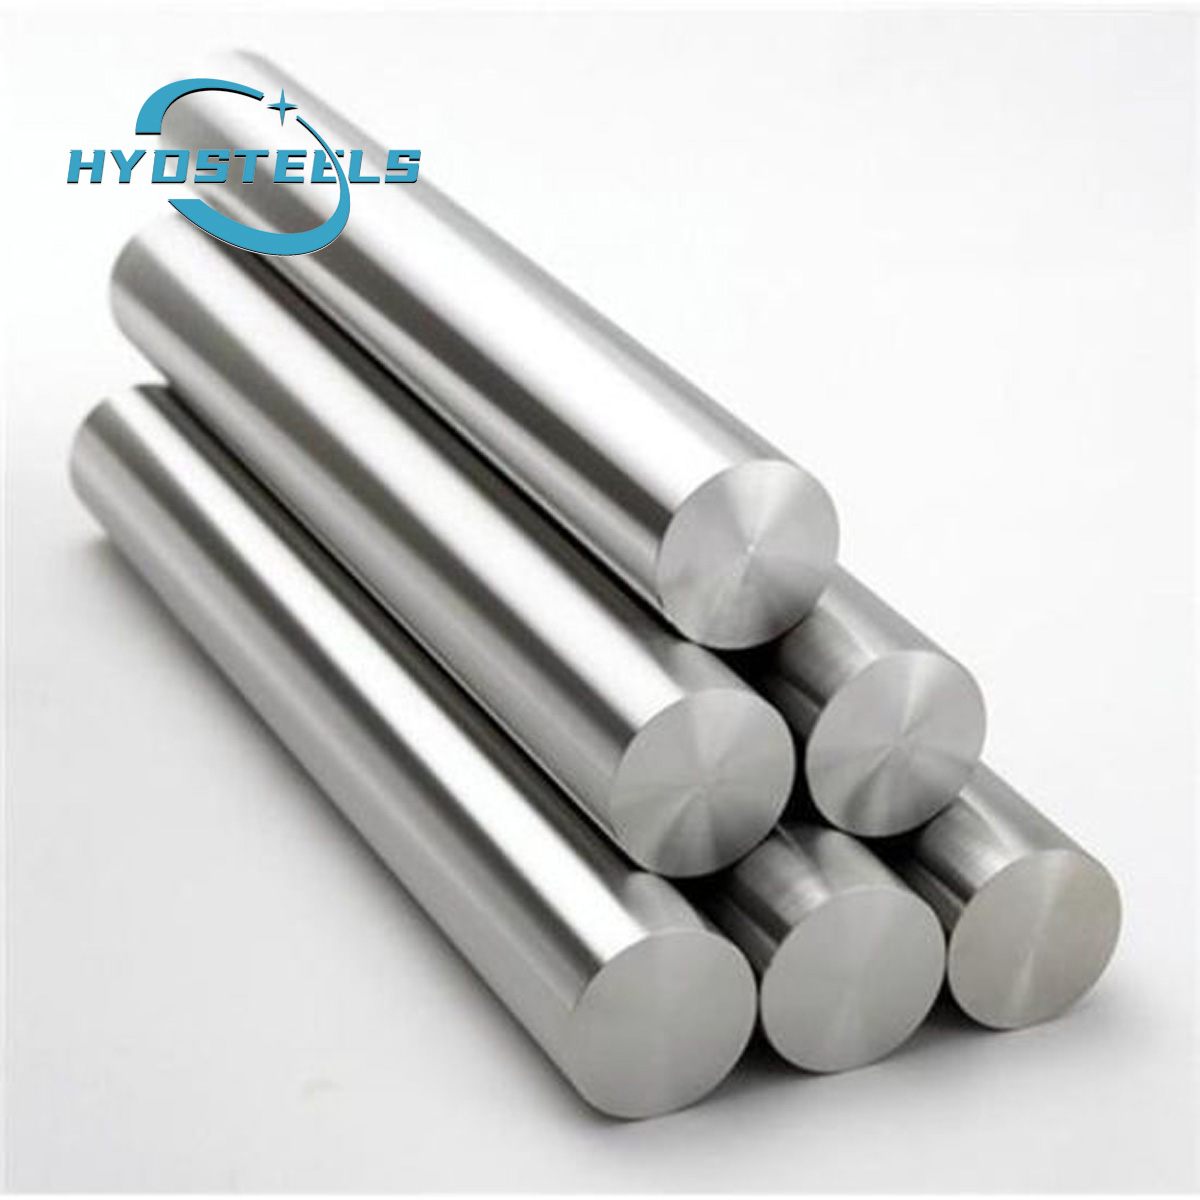 CK45 Chrome Plated Bar Manufacturer Hydraulic Piston Rod In South Africa